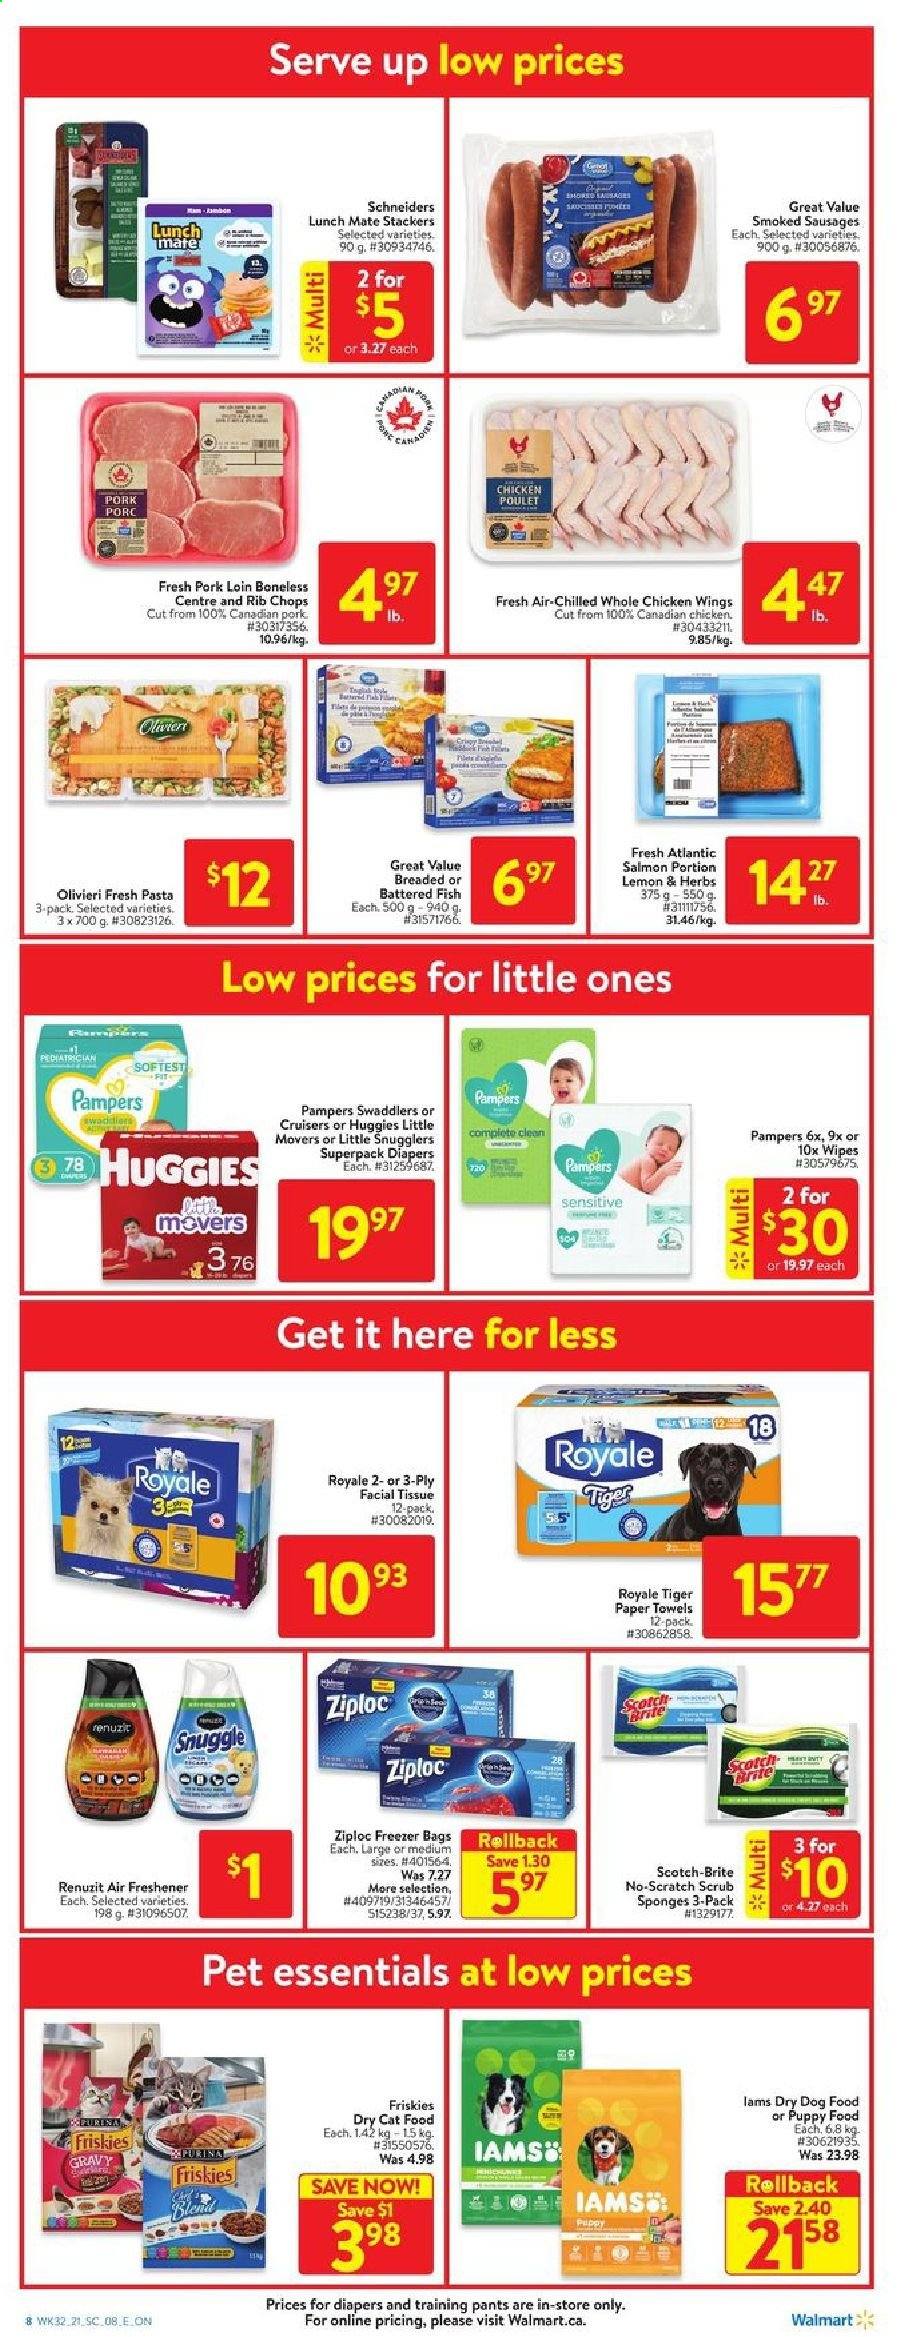 thumbnail - Walmart Flyer - September 02, 2021 - September 08, 2021 - Sales products - fish, sausage, chicken wings, whole chicken, chicken, pork loin, pork meat, rib chops, wipes, pants, nappies, baby pants, tissues, kitchen towels, paper towels, Snuggle, Brite, bag, Ziploc, sponge, freezer bag, Renuzit, air freshener, animal food, cat food, dog food, Purina, dry dog food, dry cat food, Friskies, Iams, freezer, Oreo, Huggies, Pampers. Page 9.